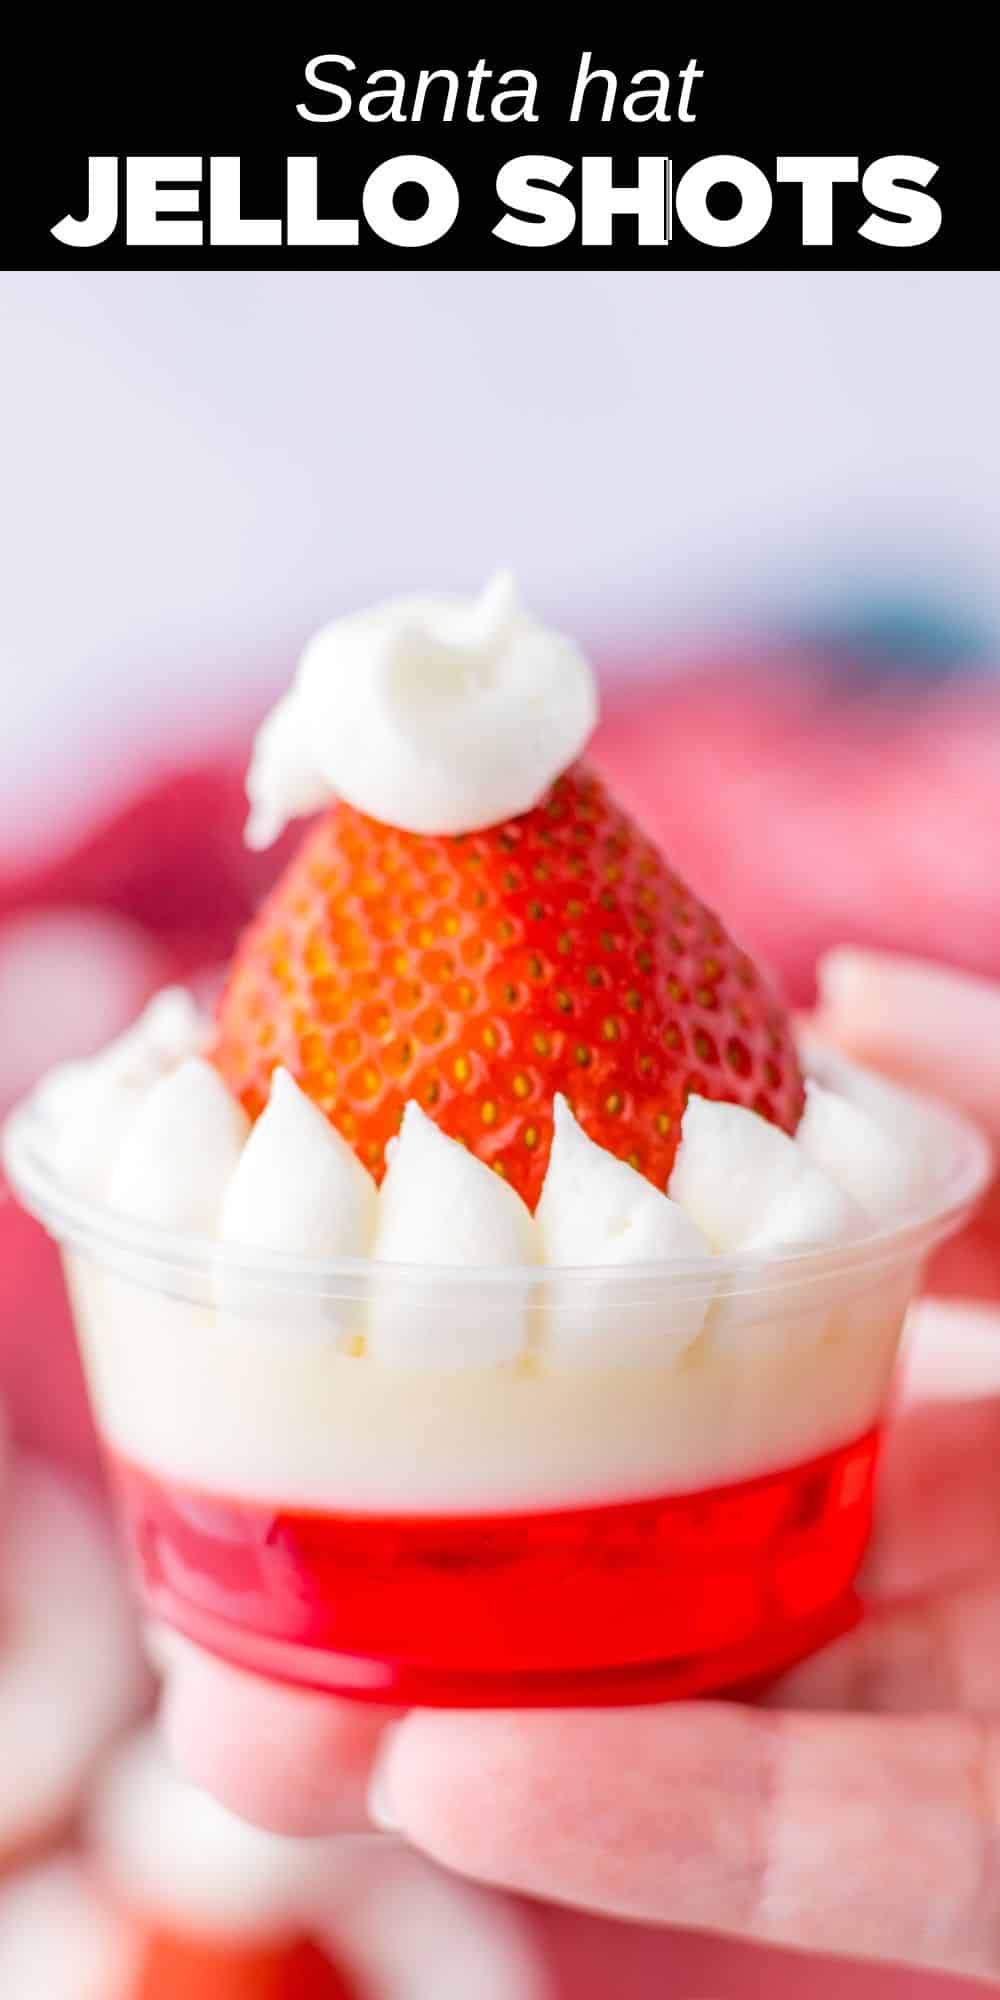 These Santa Hat Jello Shots are a festive addition to any Christmas holiday party. Layers of red and white Jello with buttercream and strawberry topping look just like Santa's hat!  You can even make a nonalcoholic version for the kids.